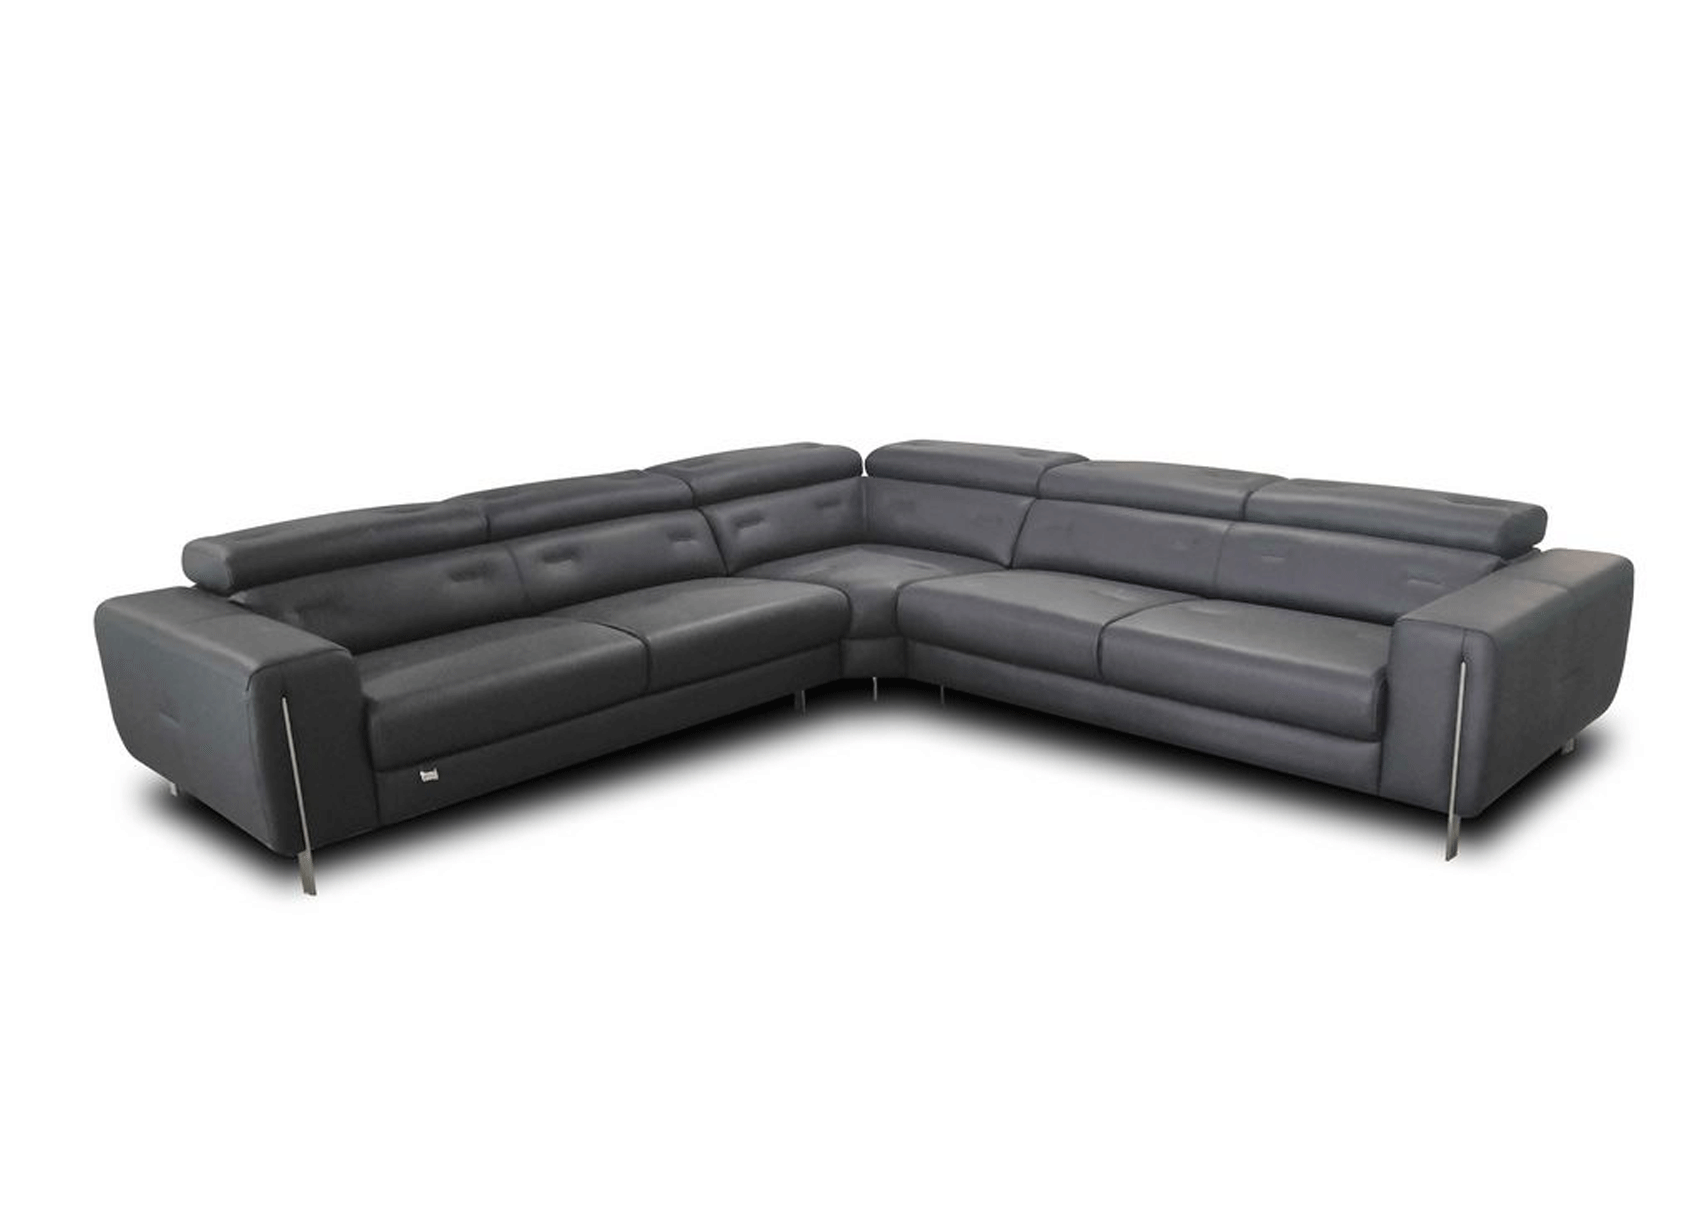 Bedroom Furniture Beds 795 Sectional